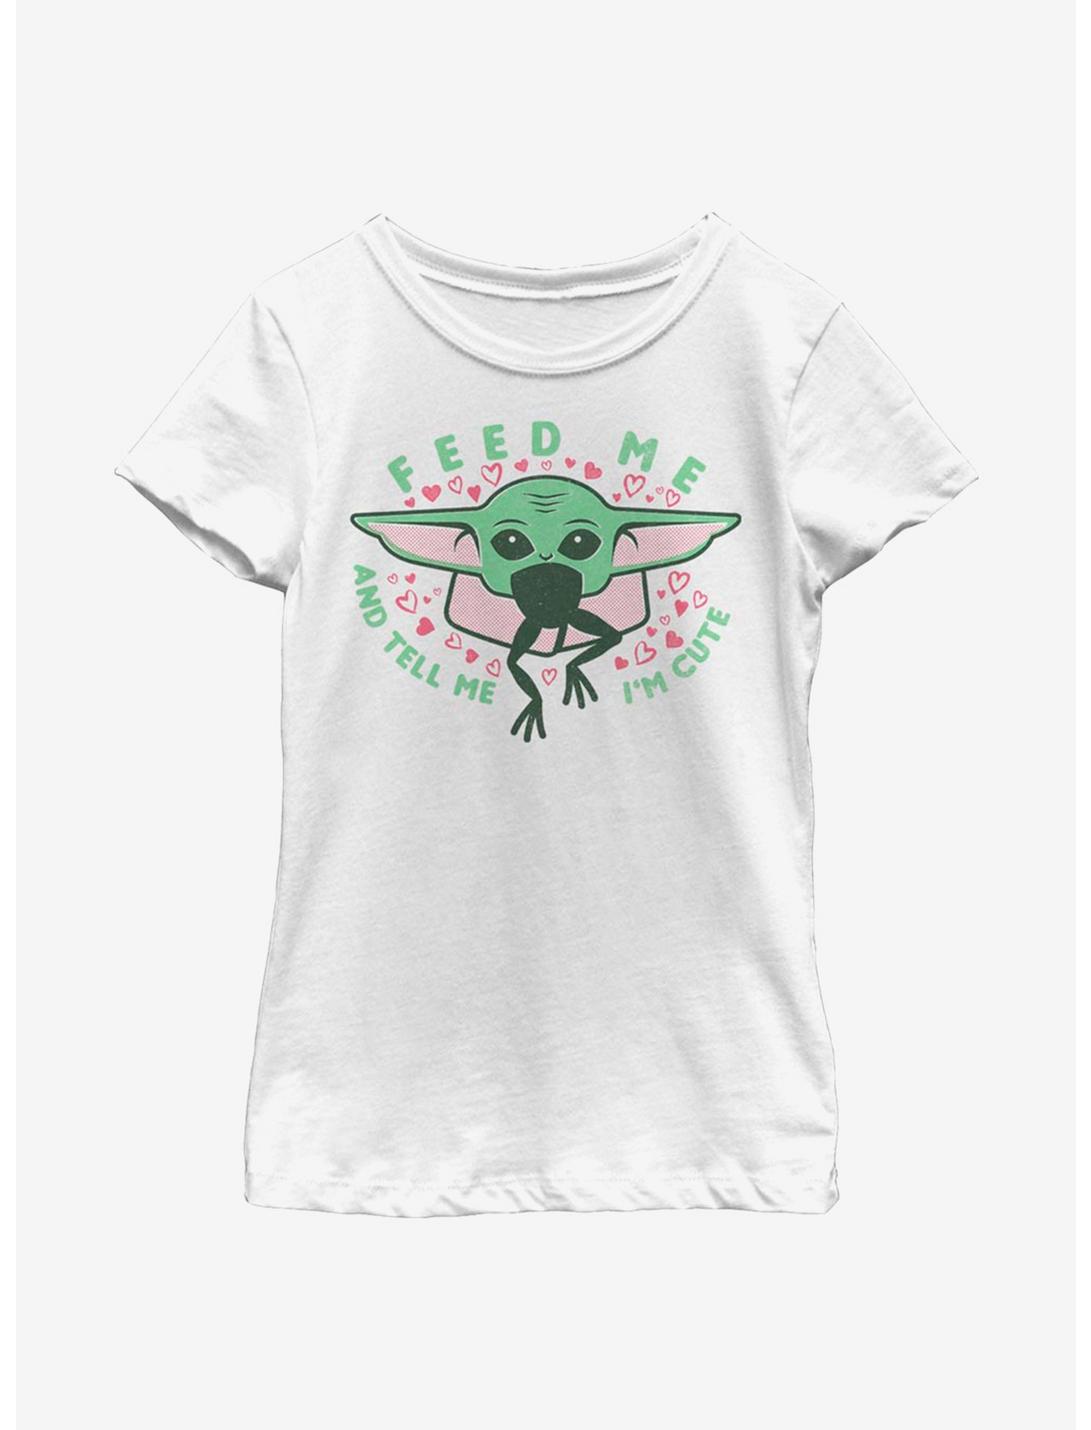 Star Wars The Mandalorian The Child Feed Me And Tell Me I'm Cute Youth Girls T-Shirt, WHITE, hi-res